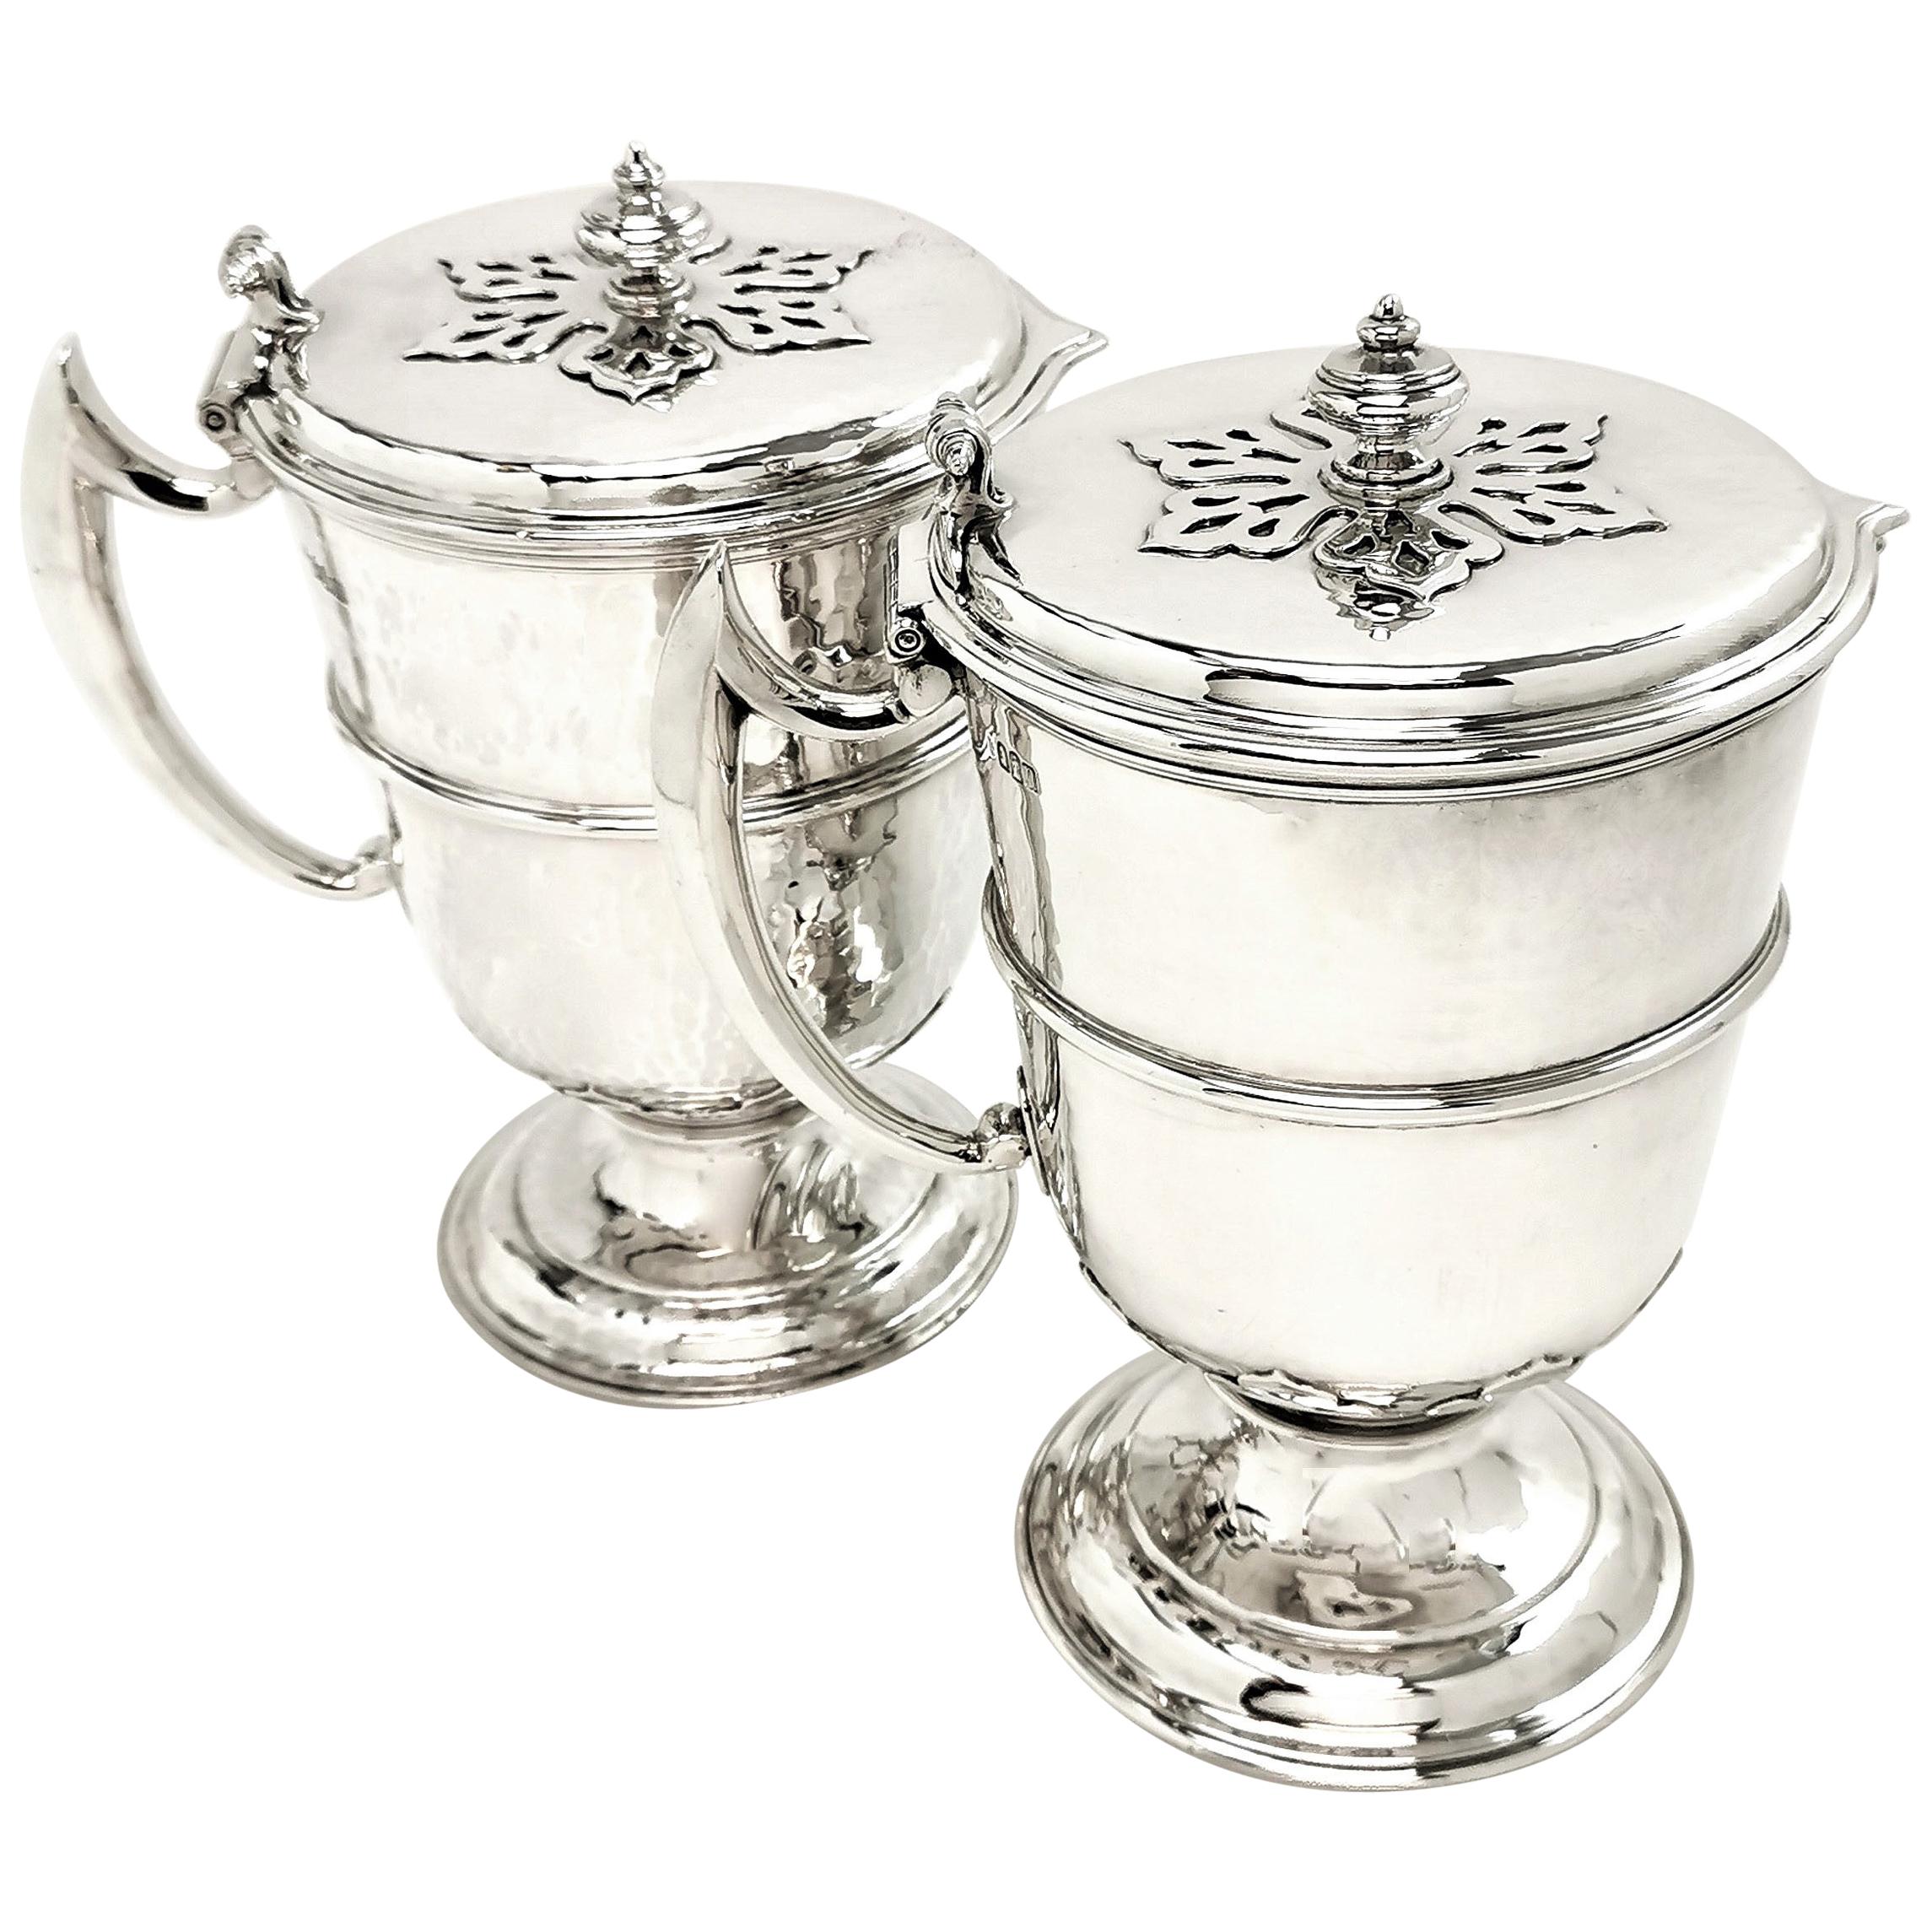 Sterling Silver Pair Jugs / Ewers in William & Mary Livery Jug Style 1907-1908